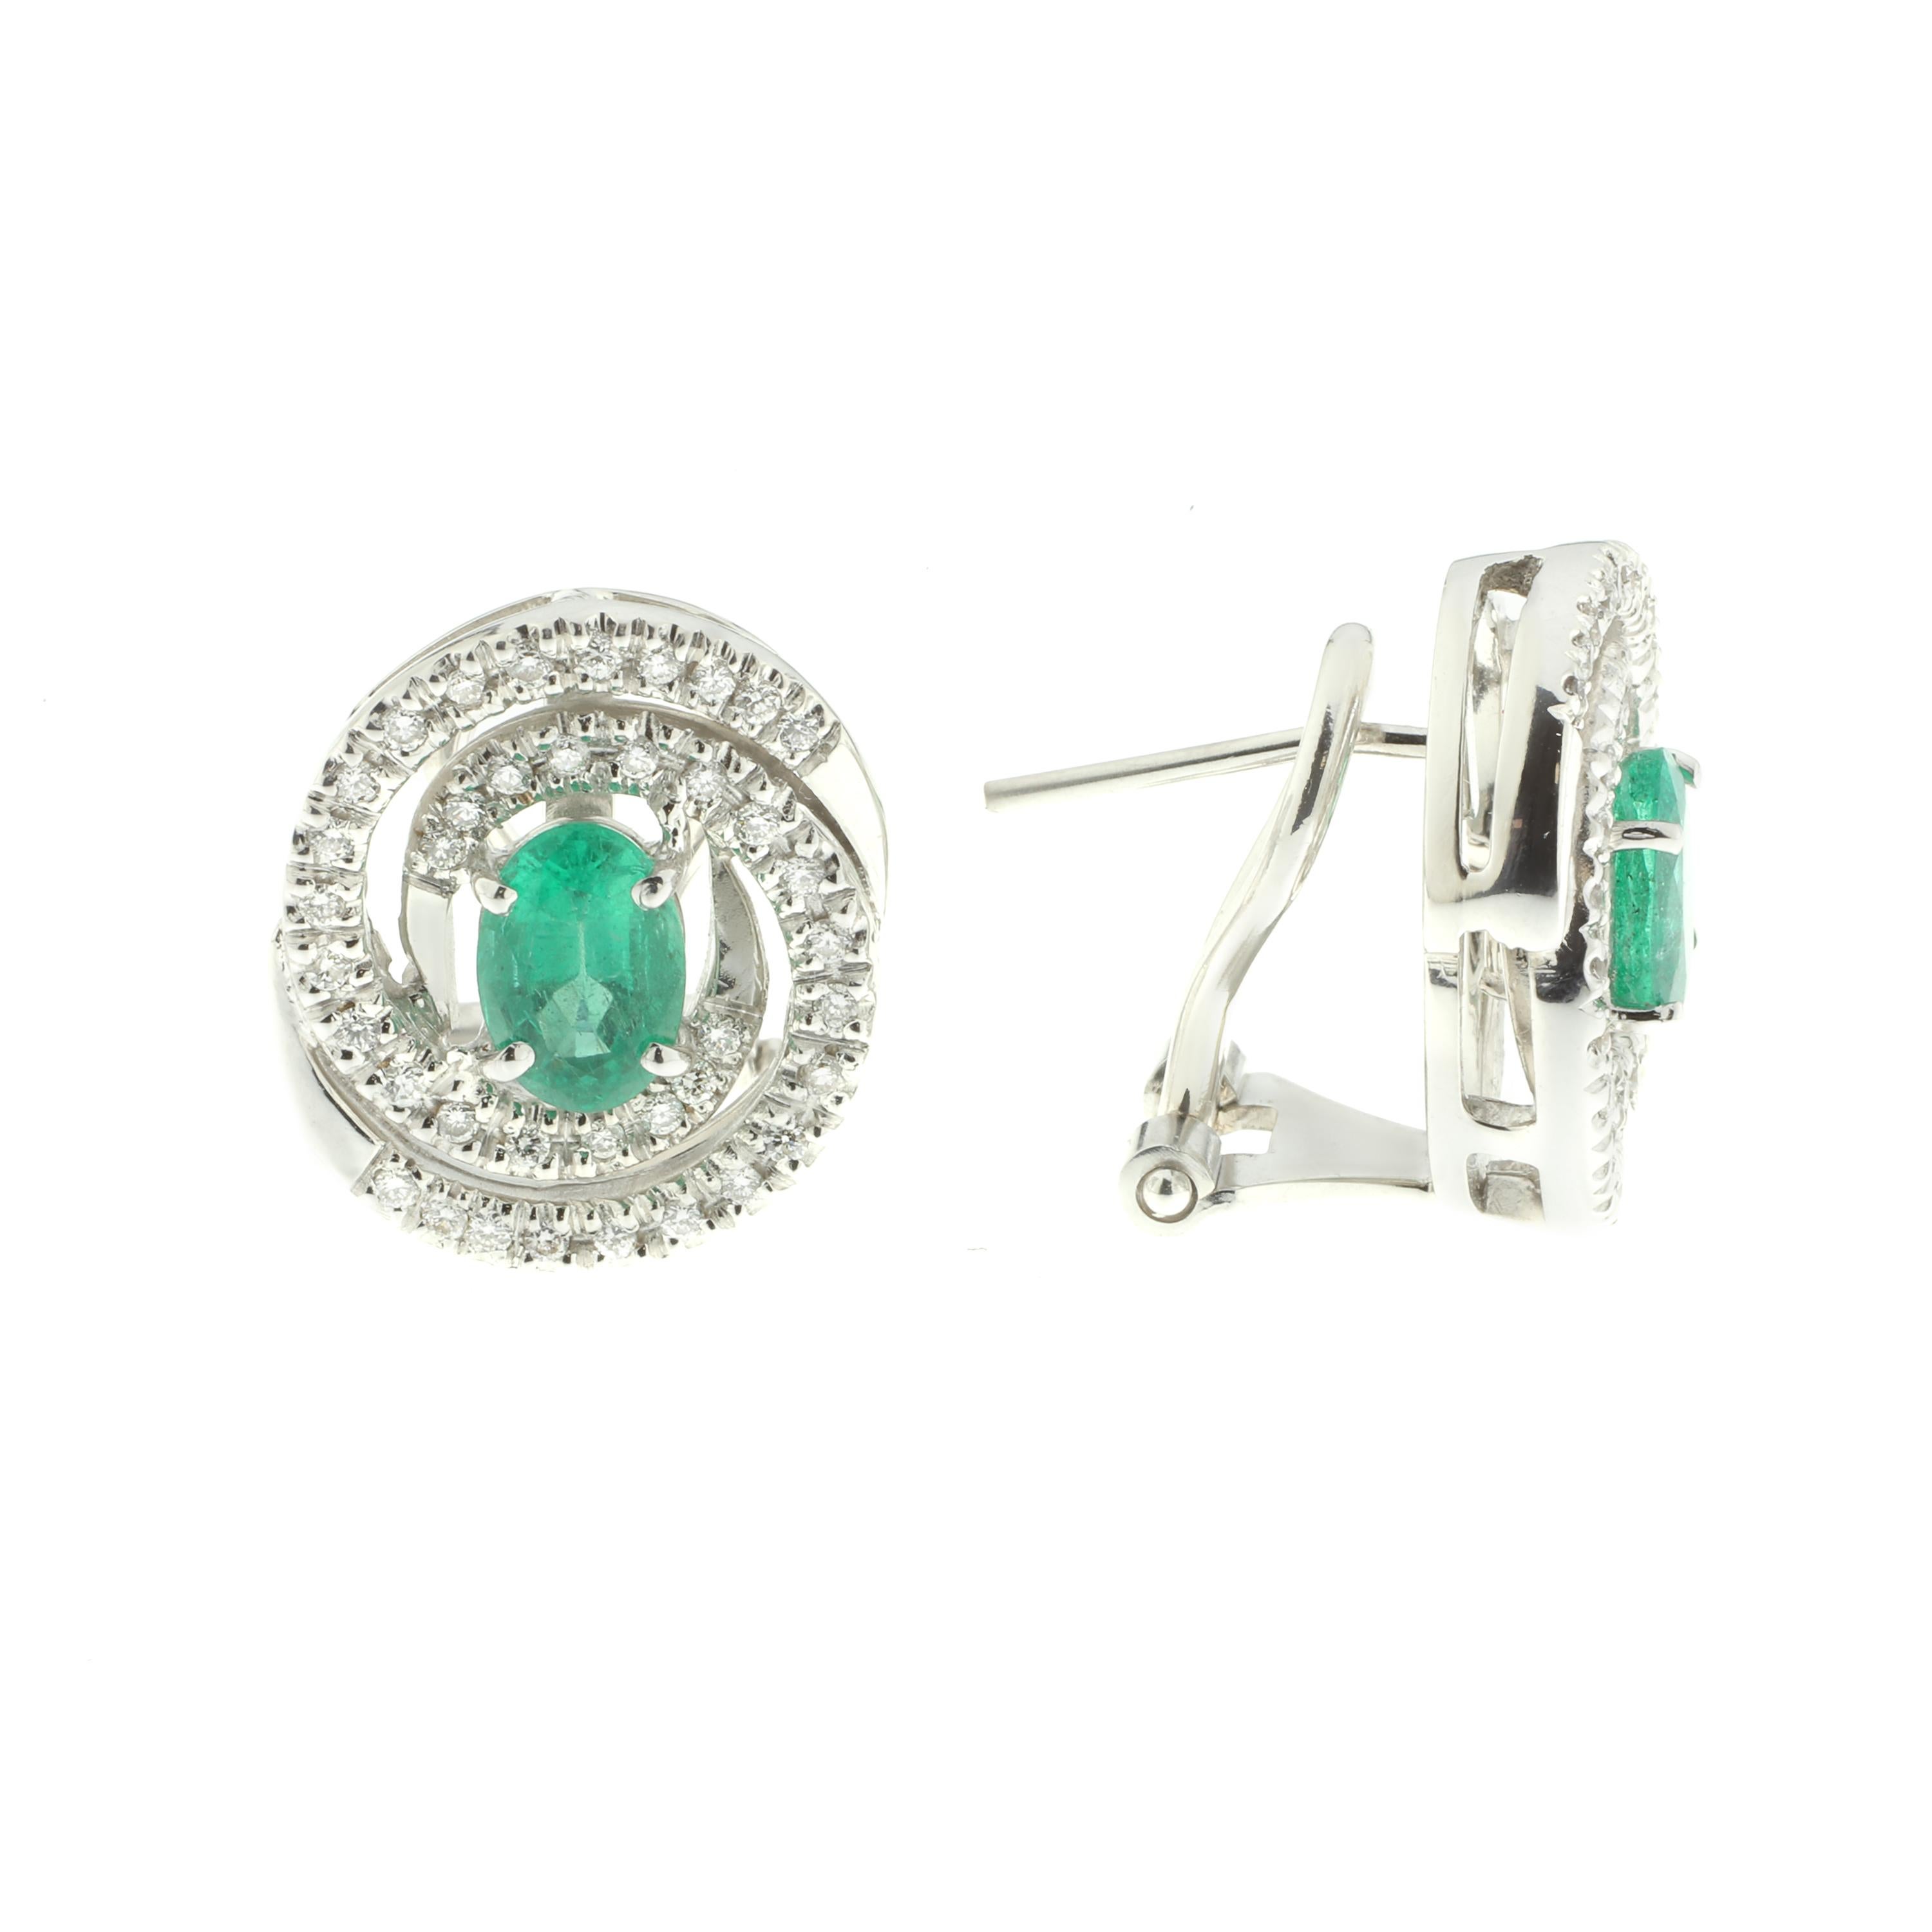 These earrings, featuring a stunning 1.36 carats of emeralds with beautiful white diamonds are masterfully handmade from 18-karat white gold. They have been worked with intricate precision into a beautiful stylized spiral that is certain to catch